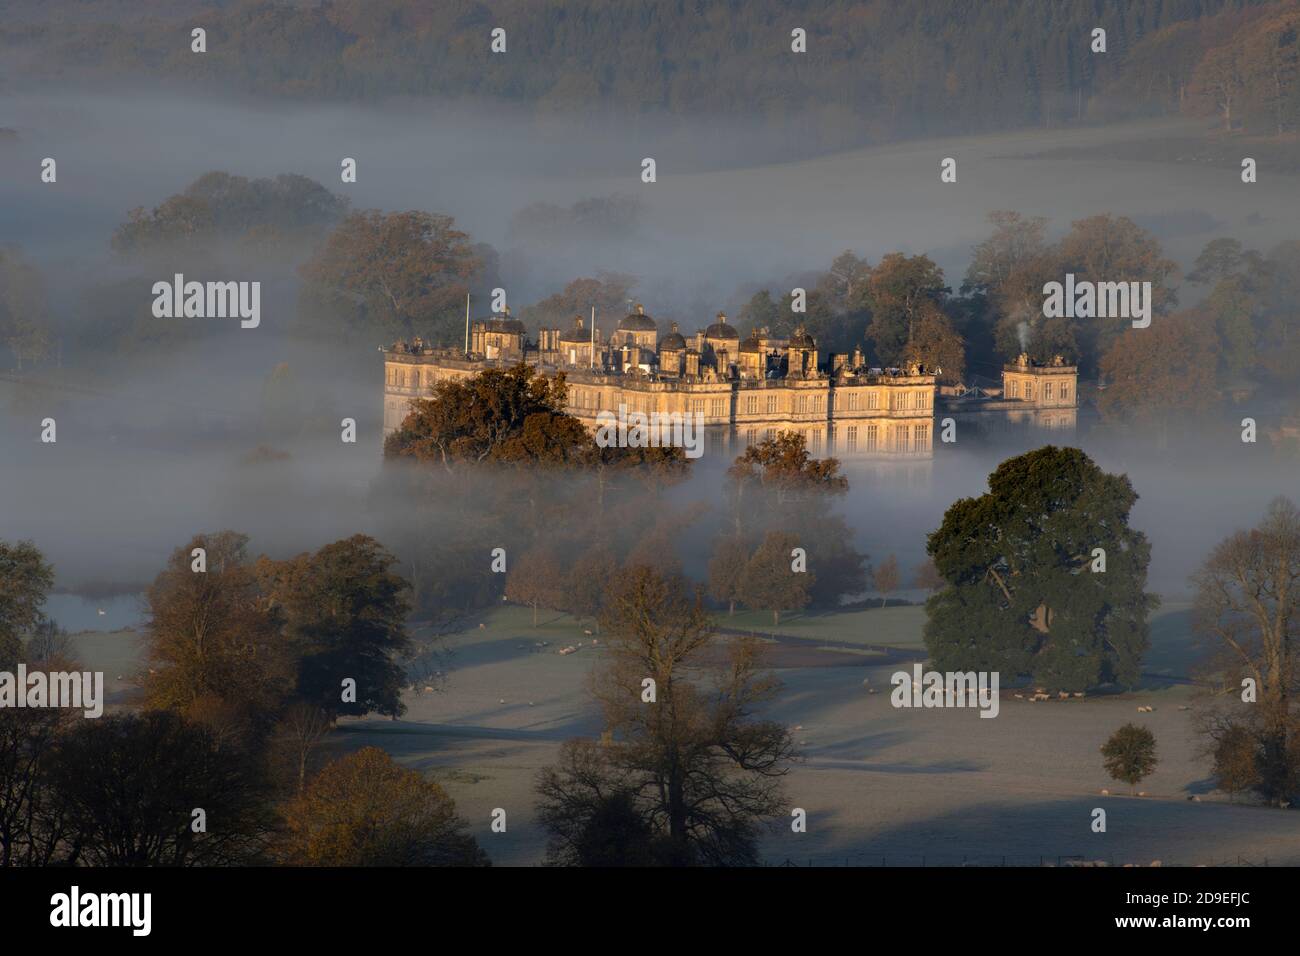 Longleat House on the longleat estate in the cheddar gorge on a mistyautumn morning Stock Photo